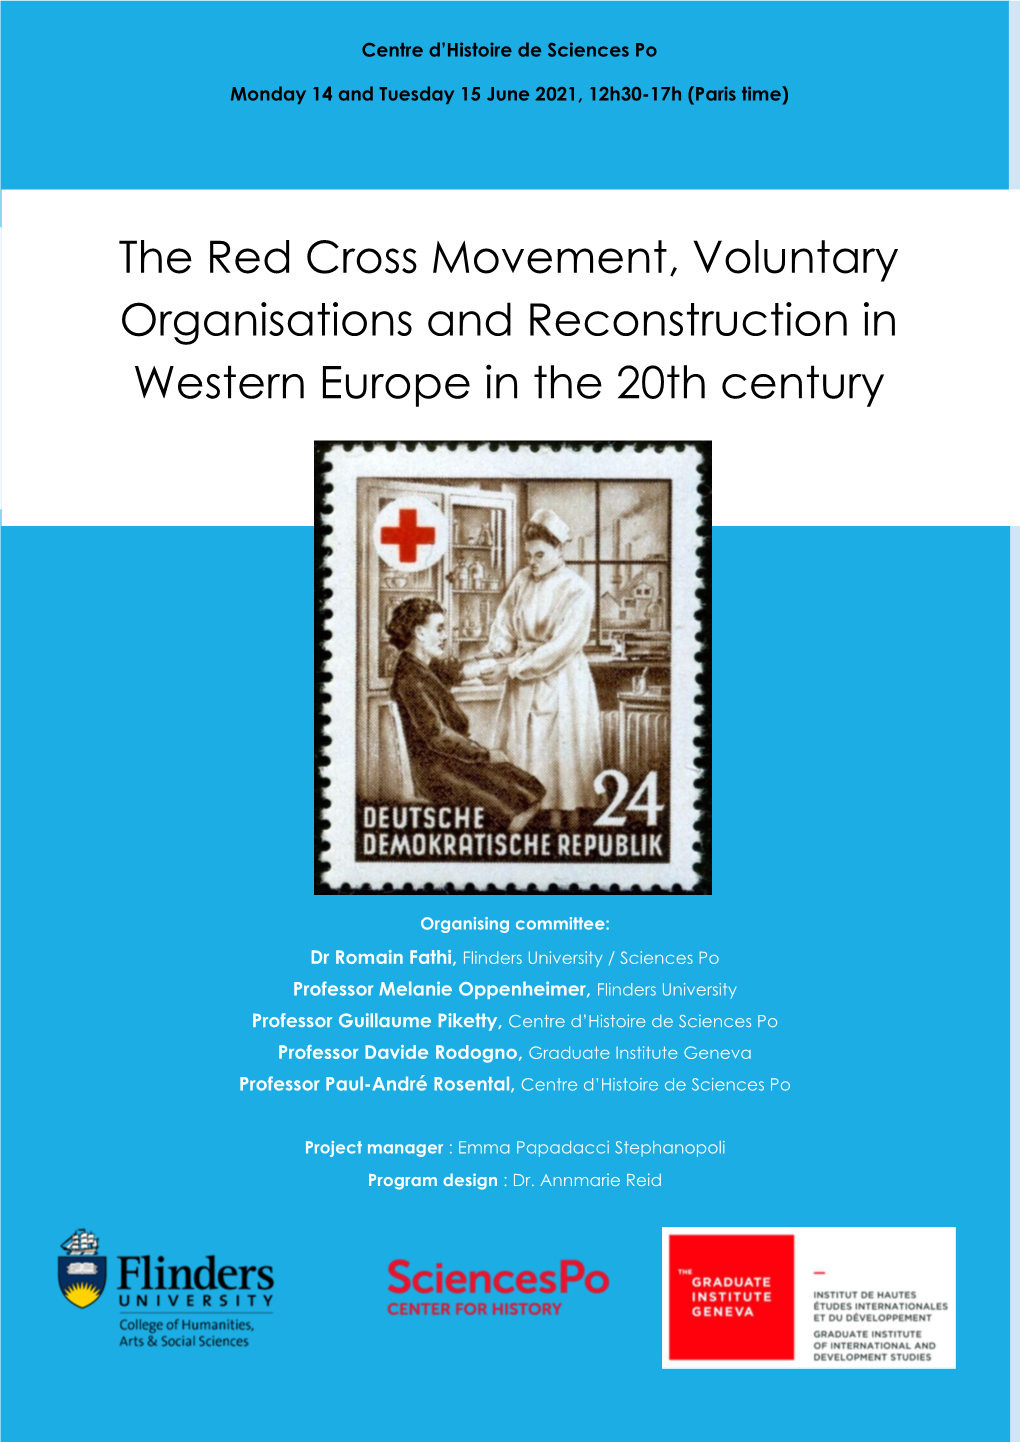 The Red Cross Movement, Voluntary Organisations and Reconstruction in Western Europe in the 20Th Century